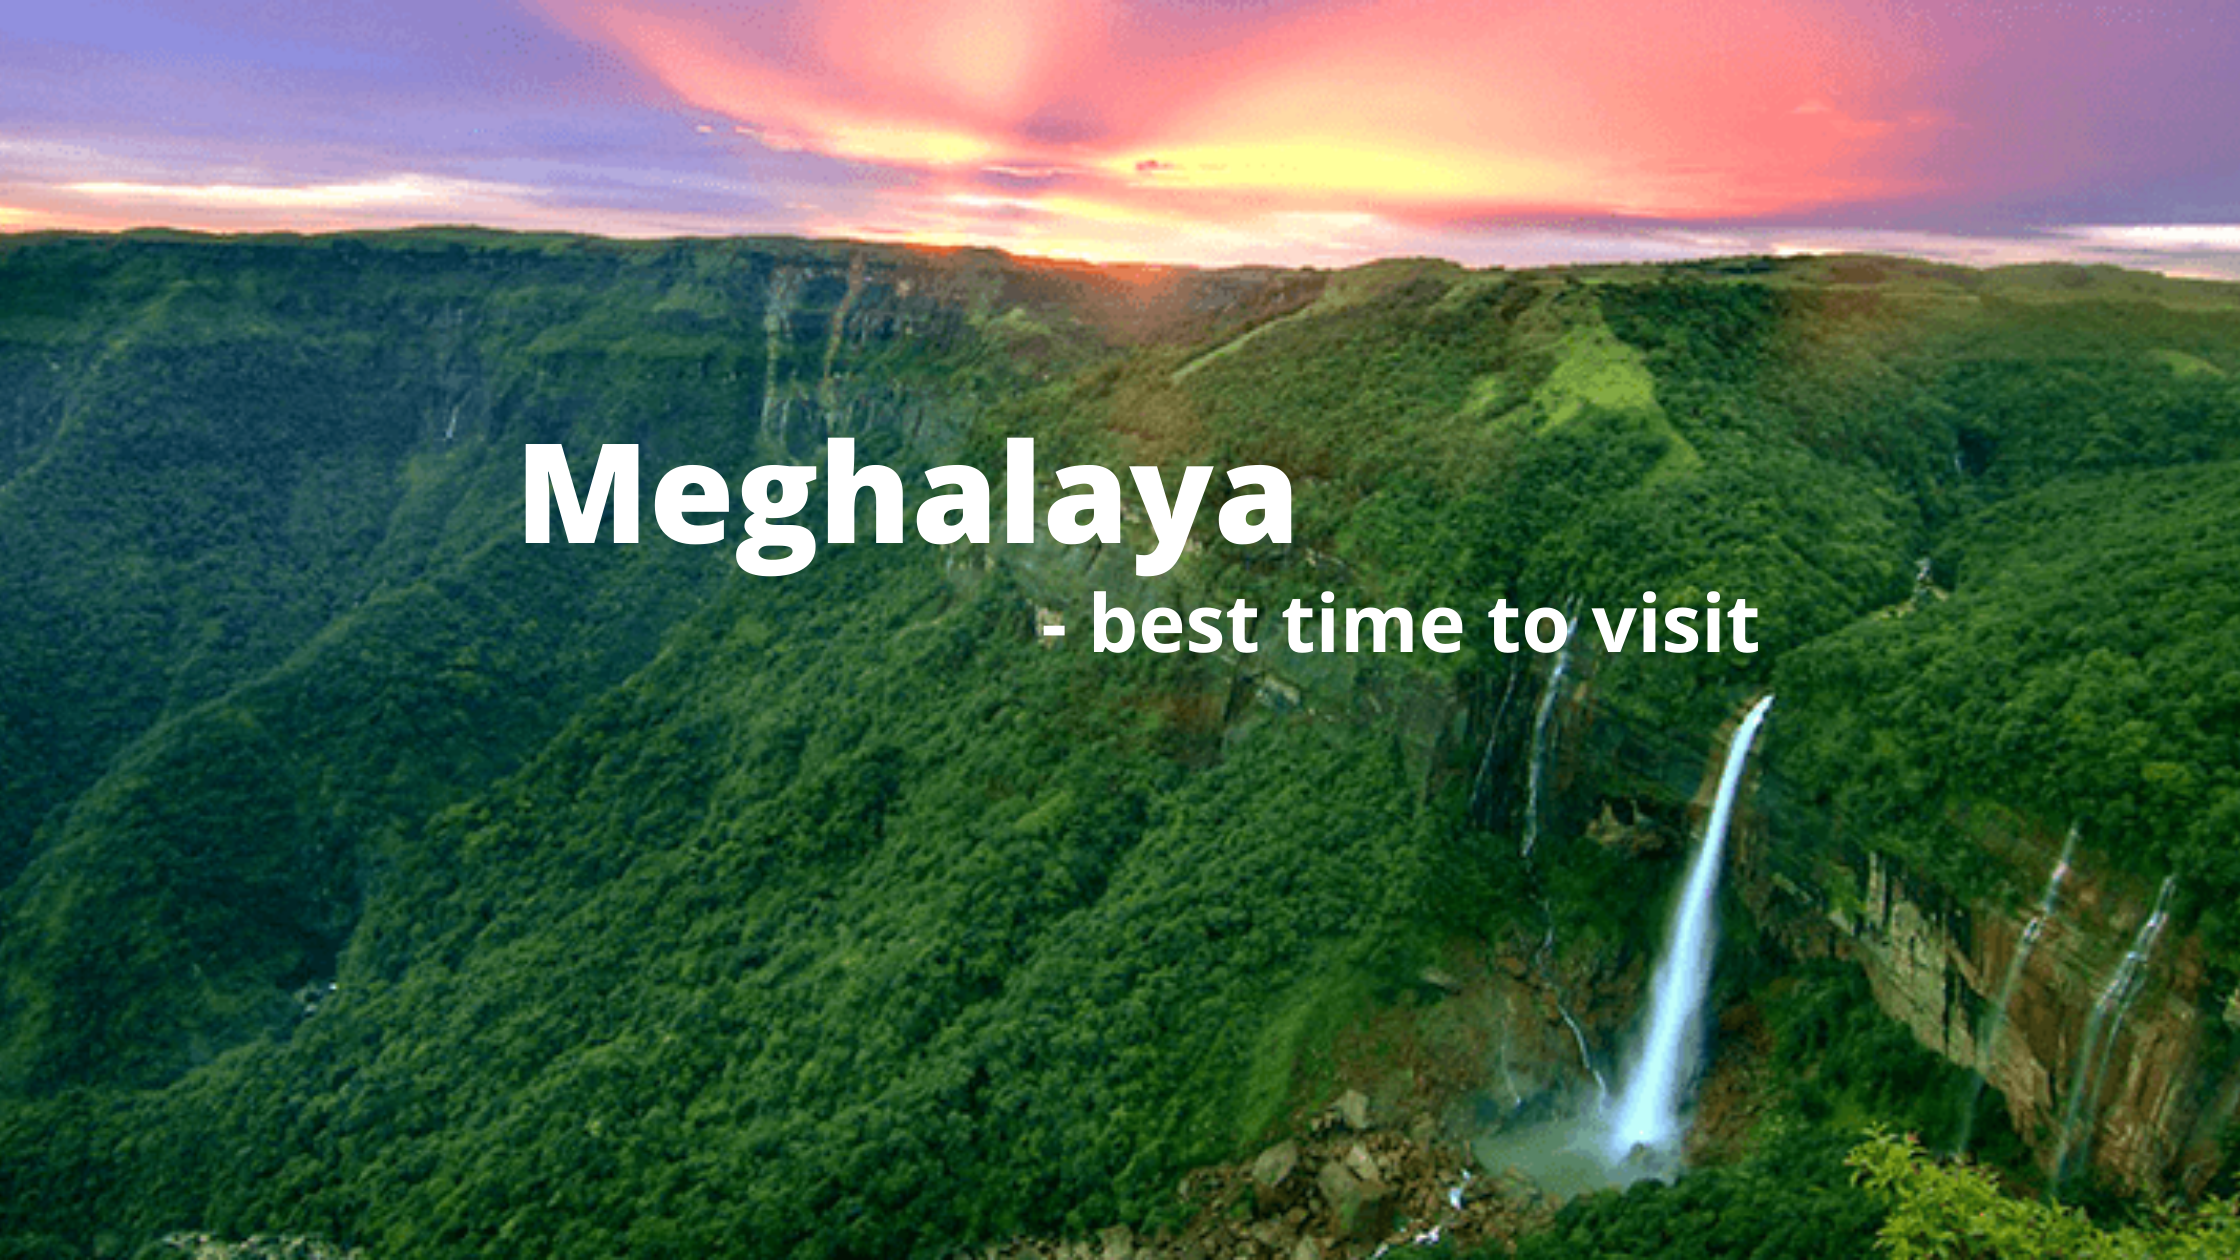 When Is The Best Time To Visit Meghalaya: A Definitive Guide 4 you